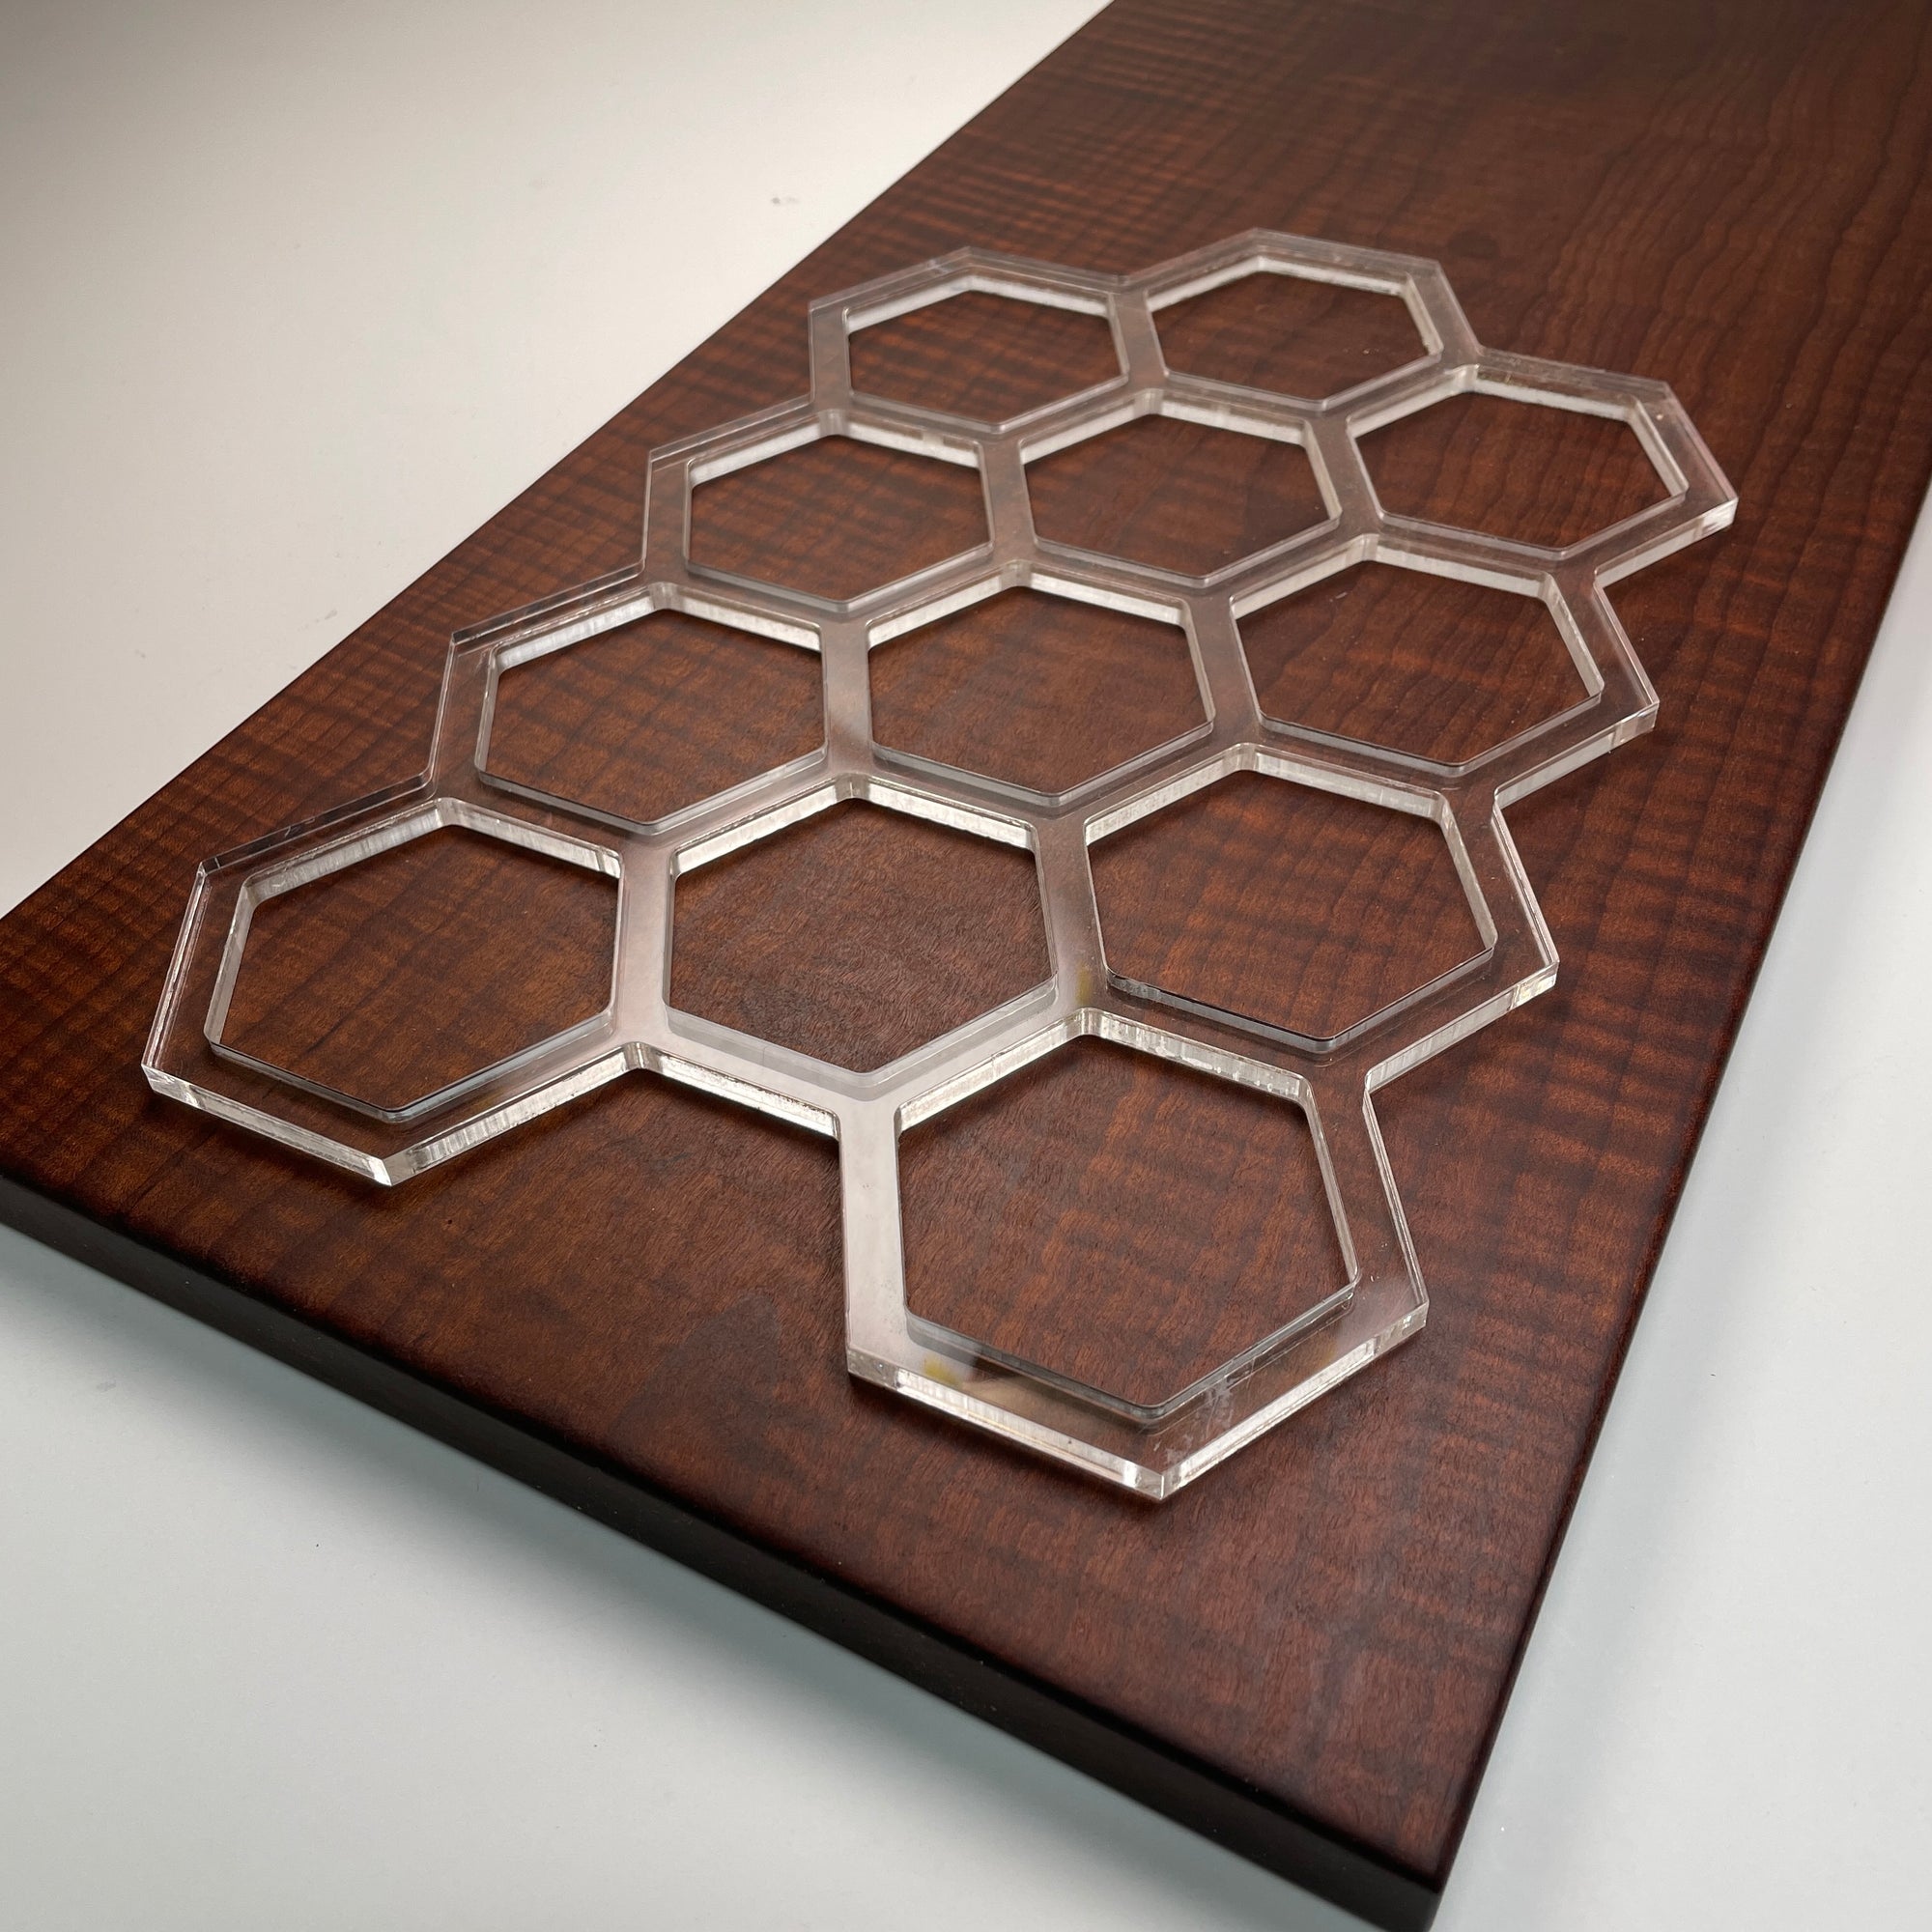 Honeycomb Router Template